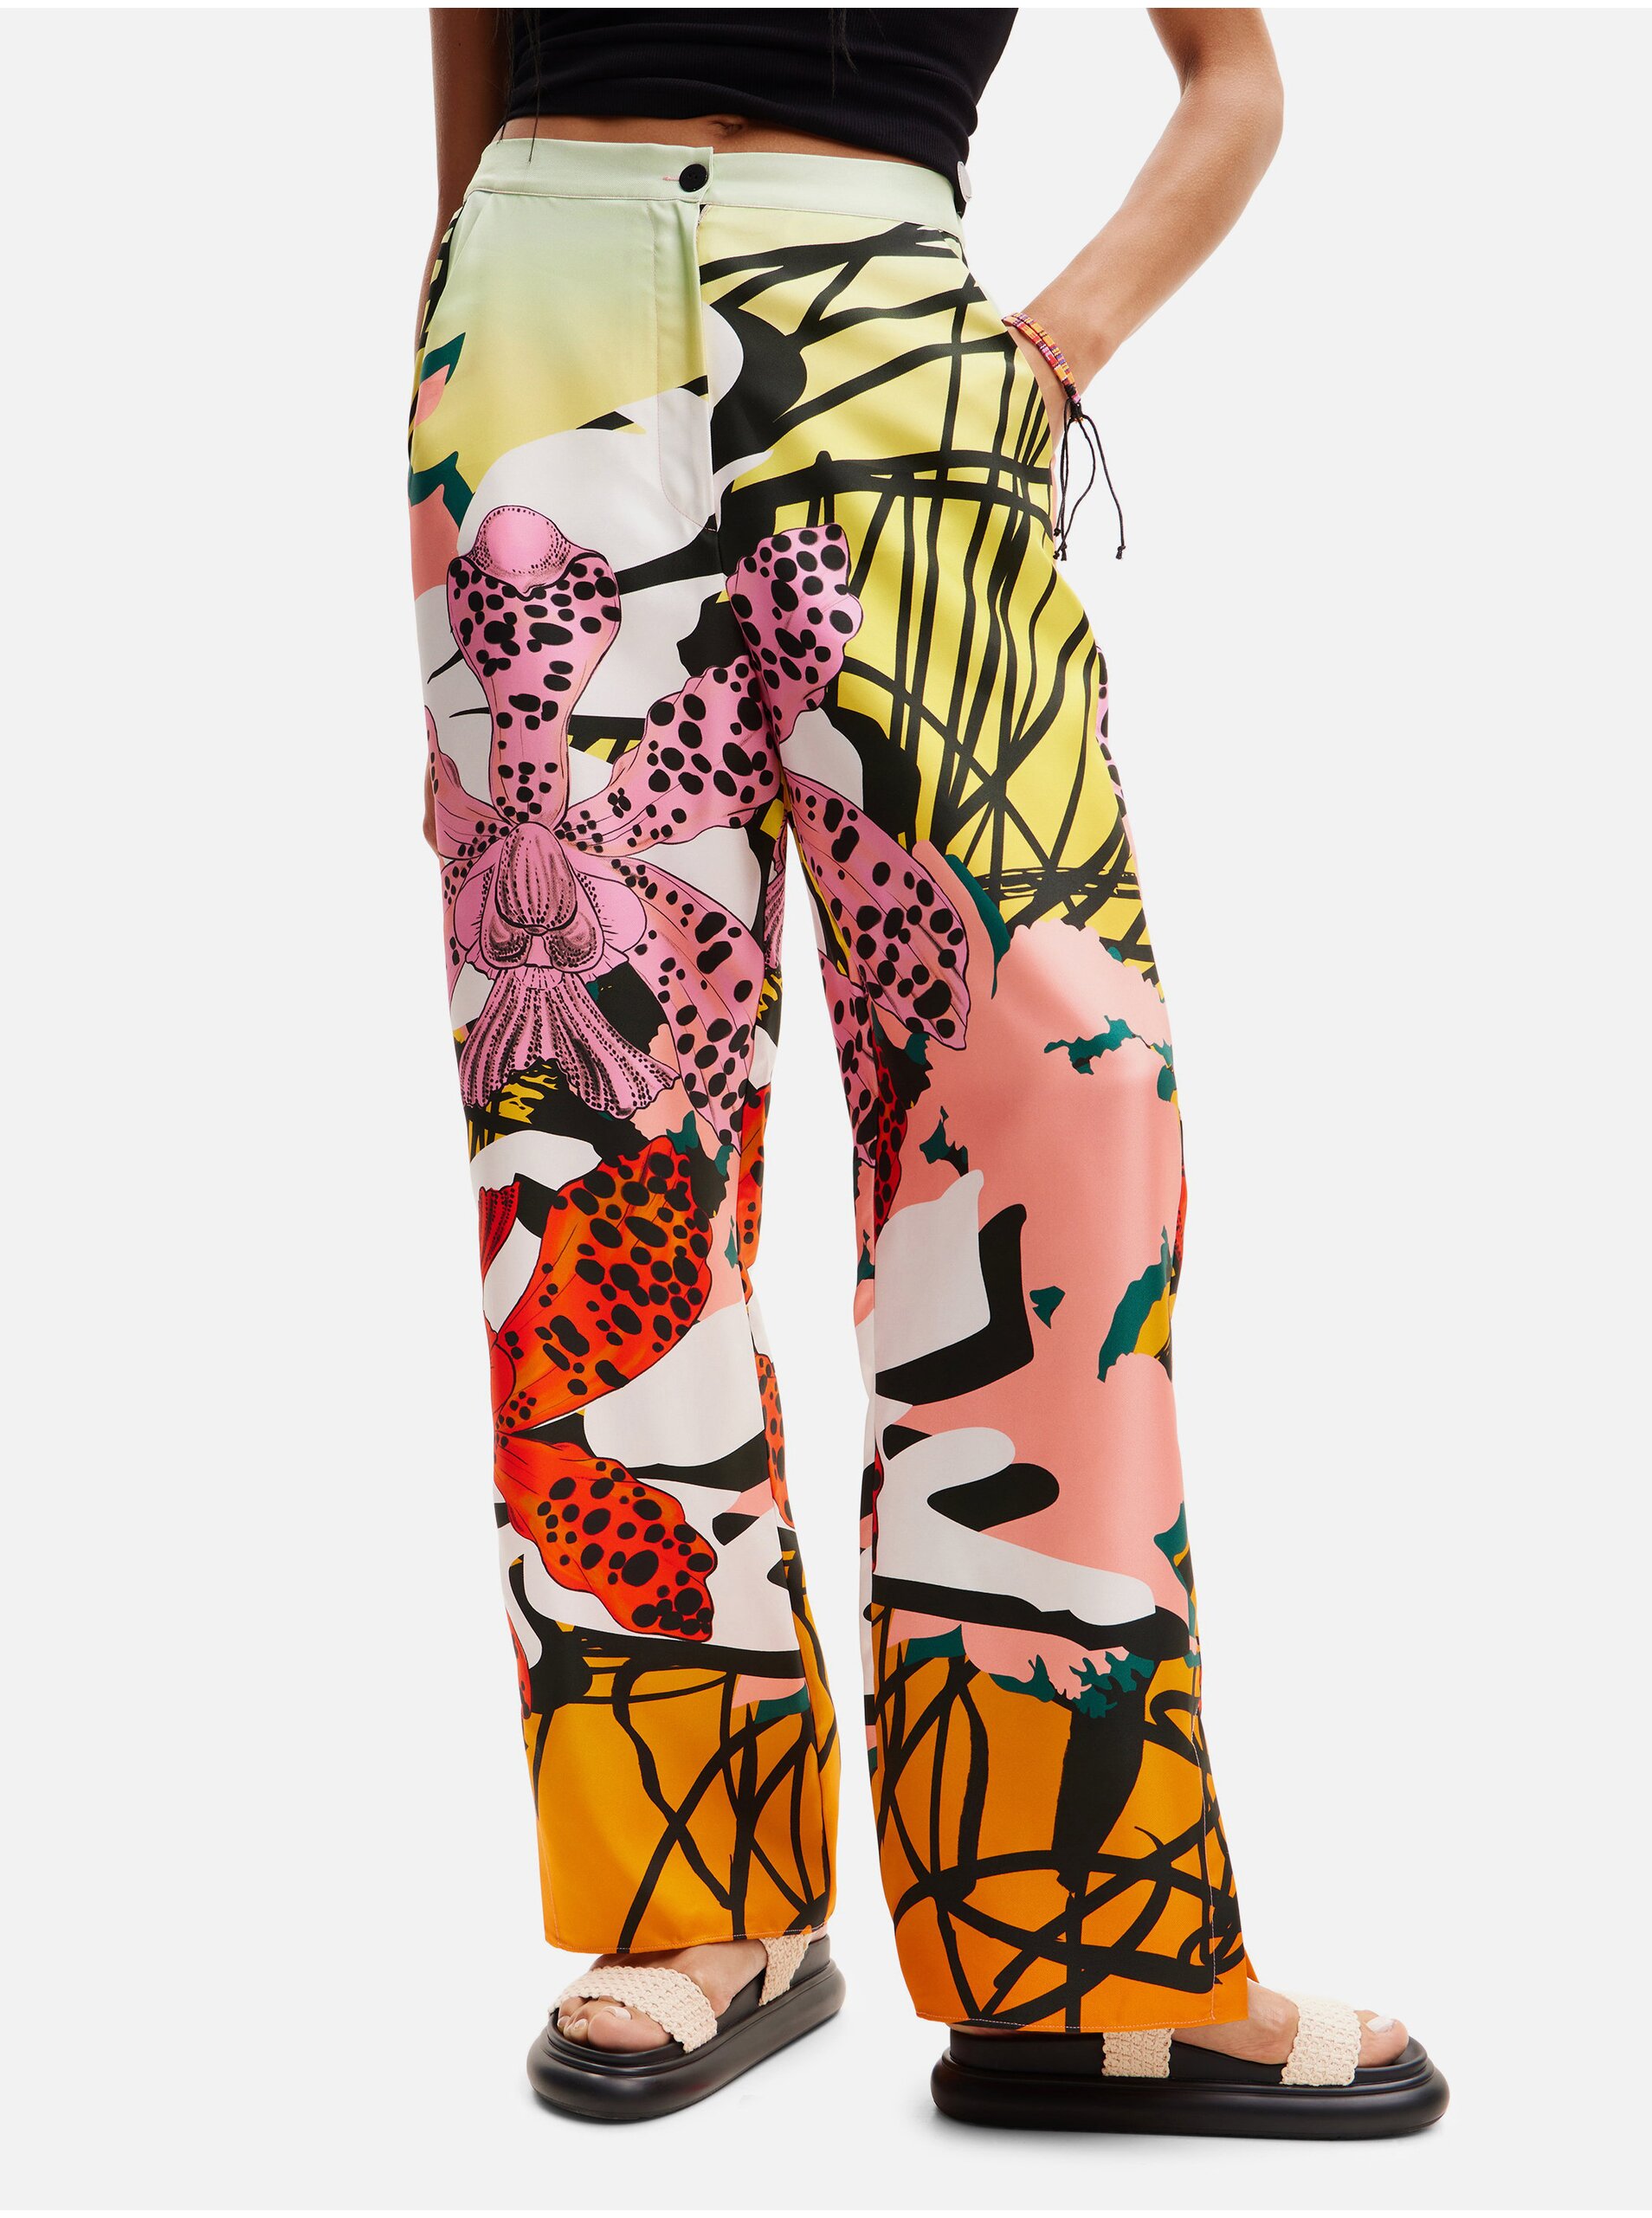 Women's Yellow and Pink Patterned Silk Trousers Desigual Ericeira - Women